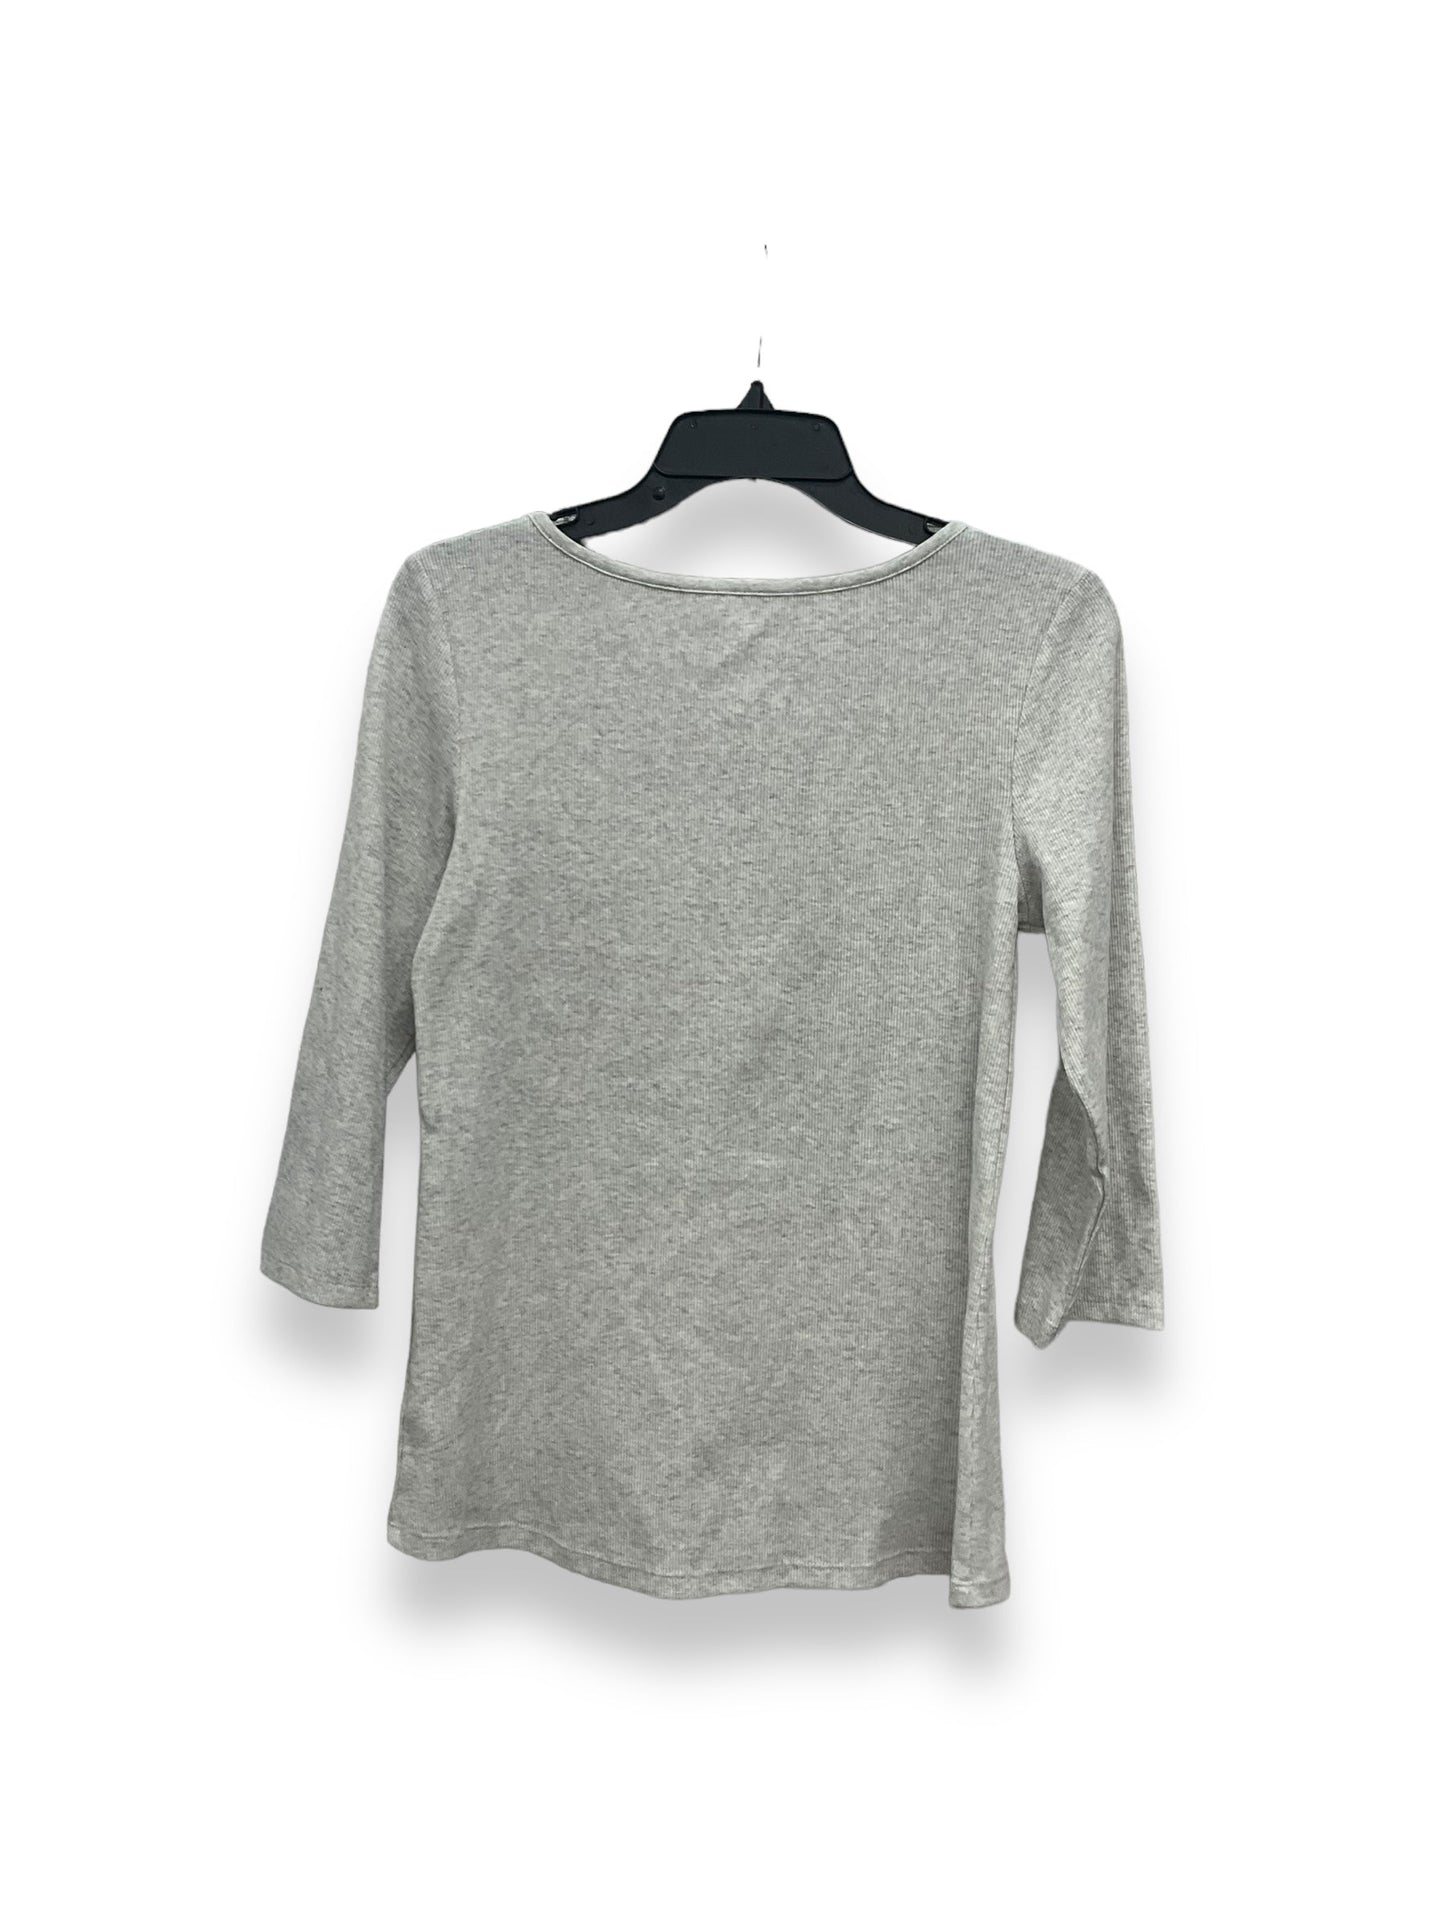 Grey Top Long Sleeve Old Navy, Size M